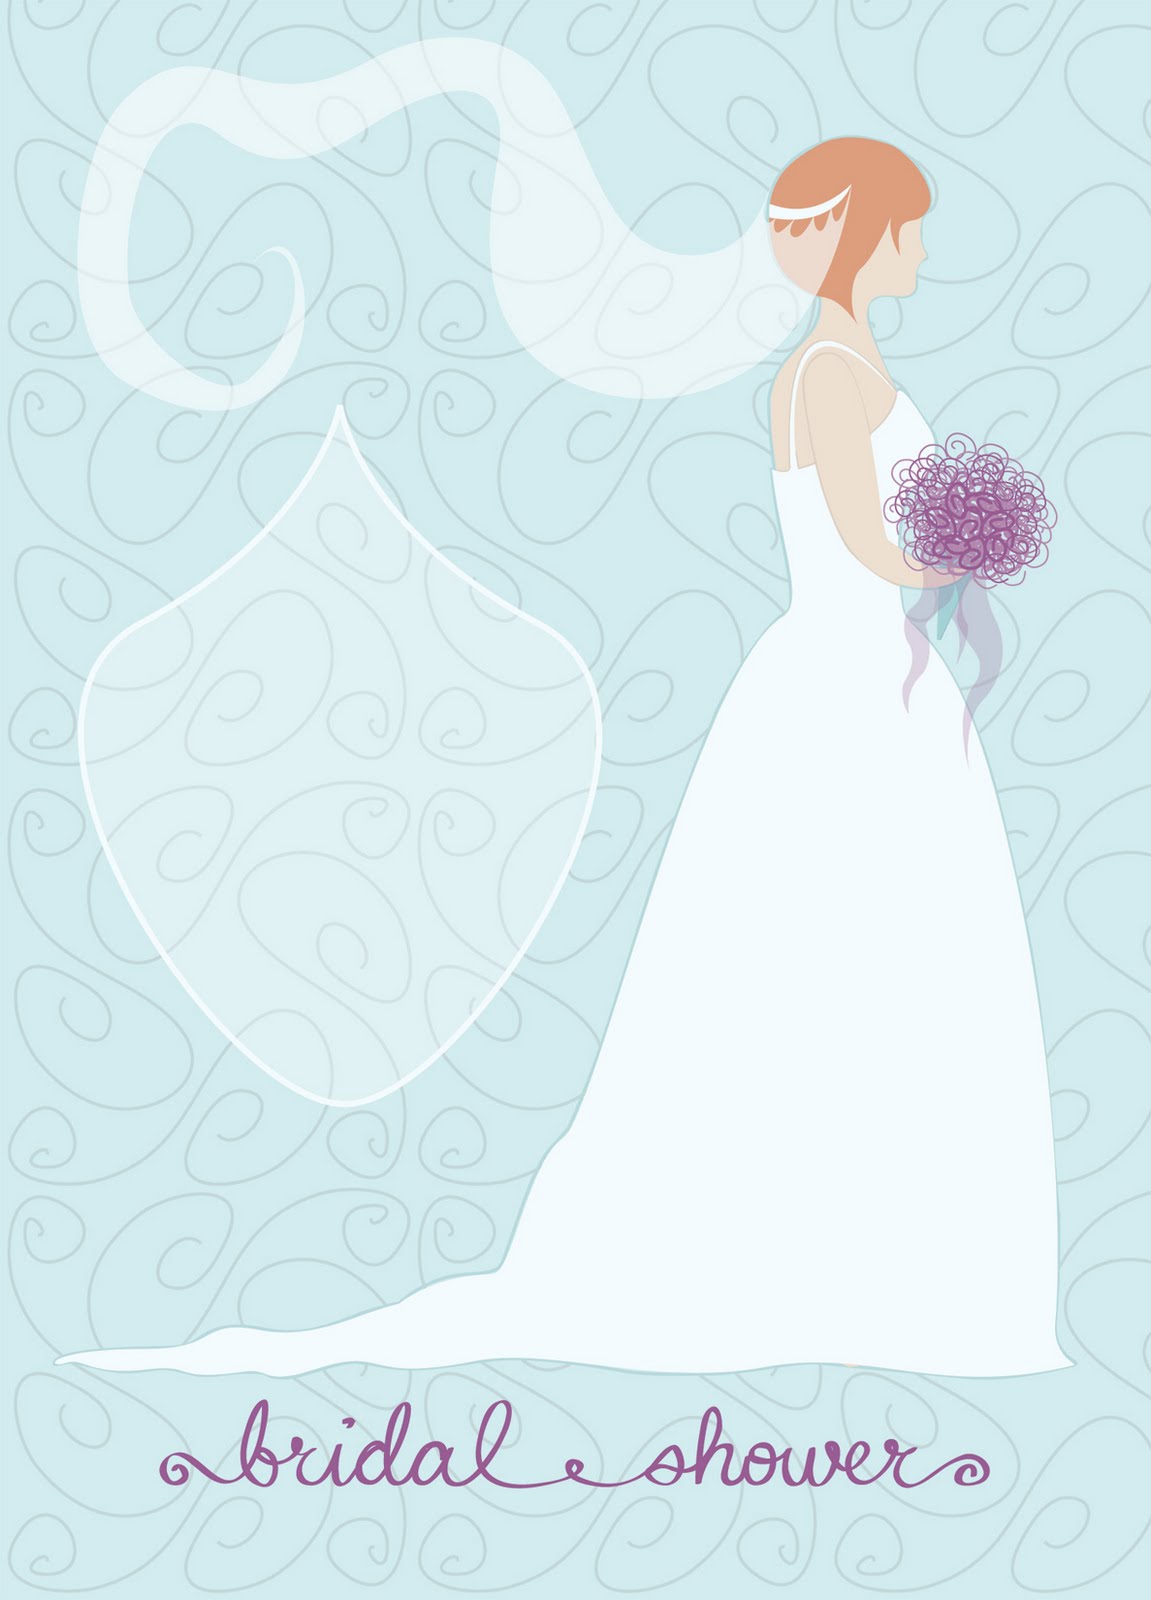 free clipart for wedding shower invitations - photo #20